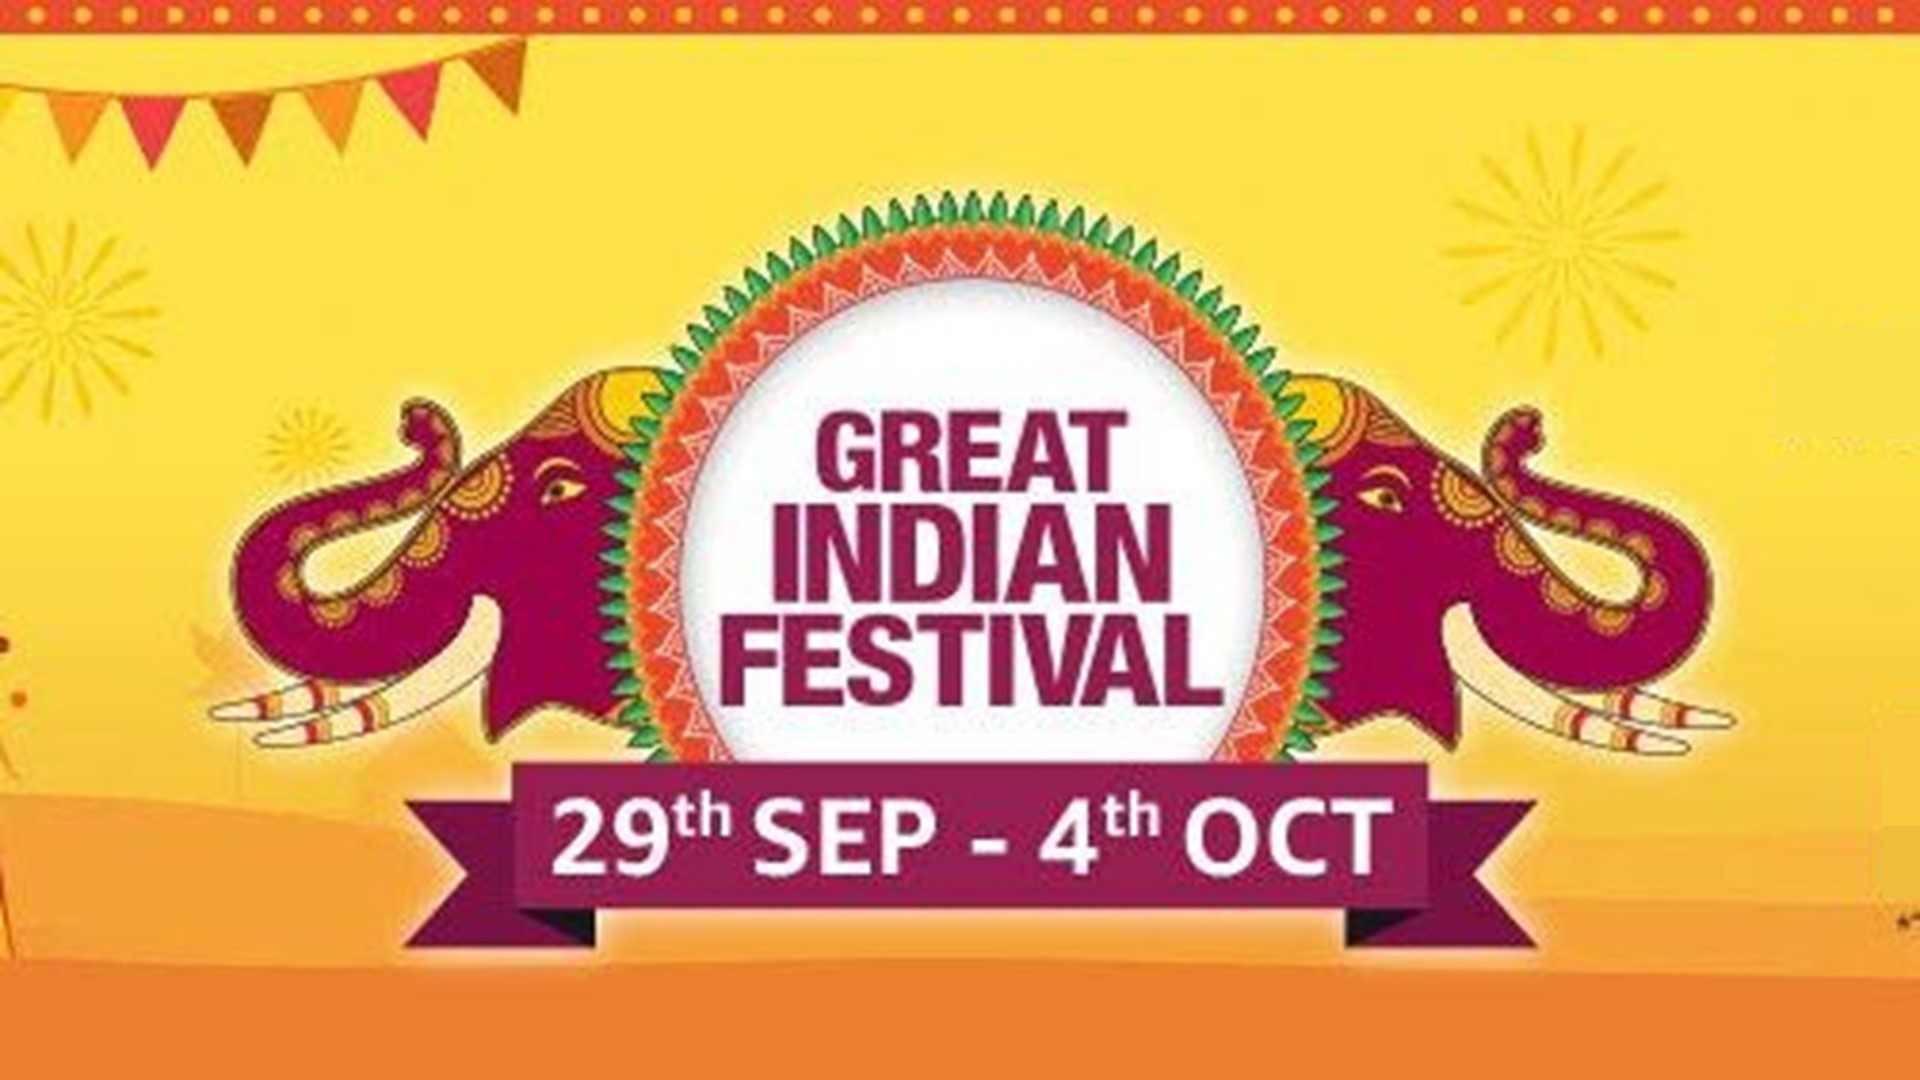 Great Indian Festival | Upto 90% Off + 10% Instant Discount/Bonus Offers via SBI Cards (29th Sept - 4th Oct)